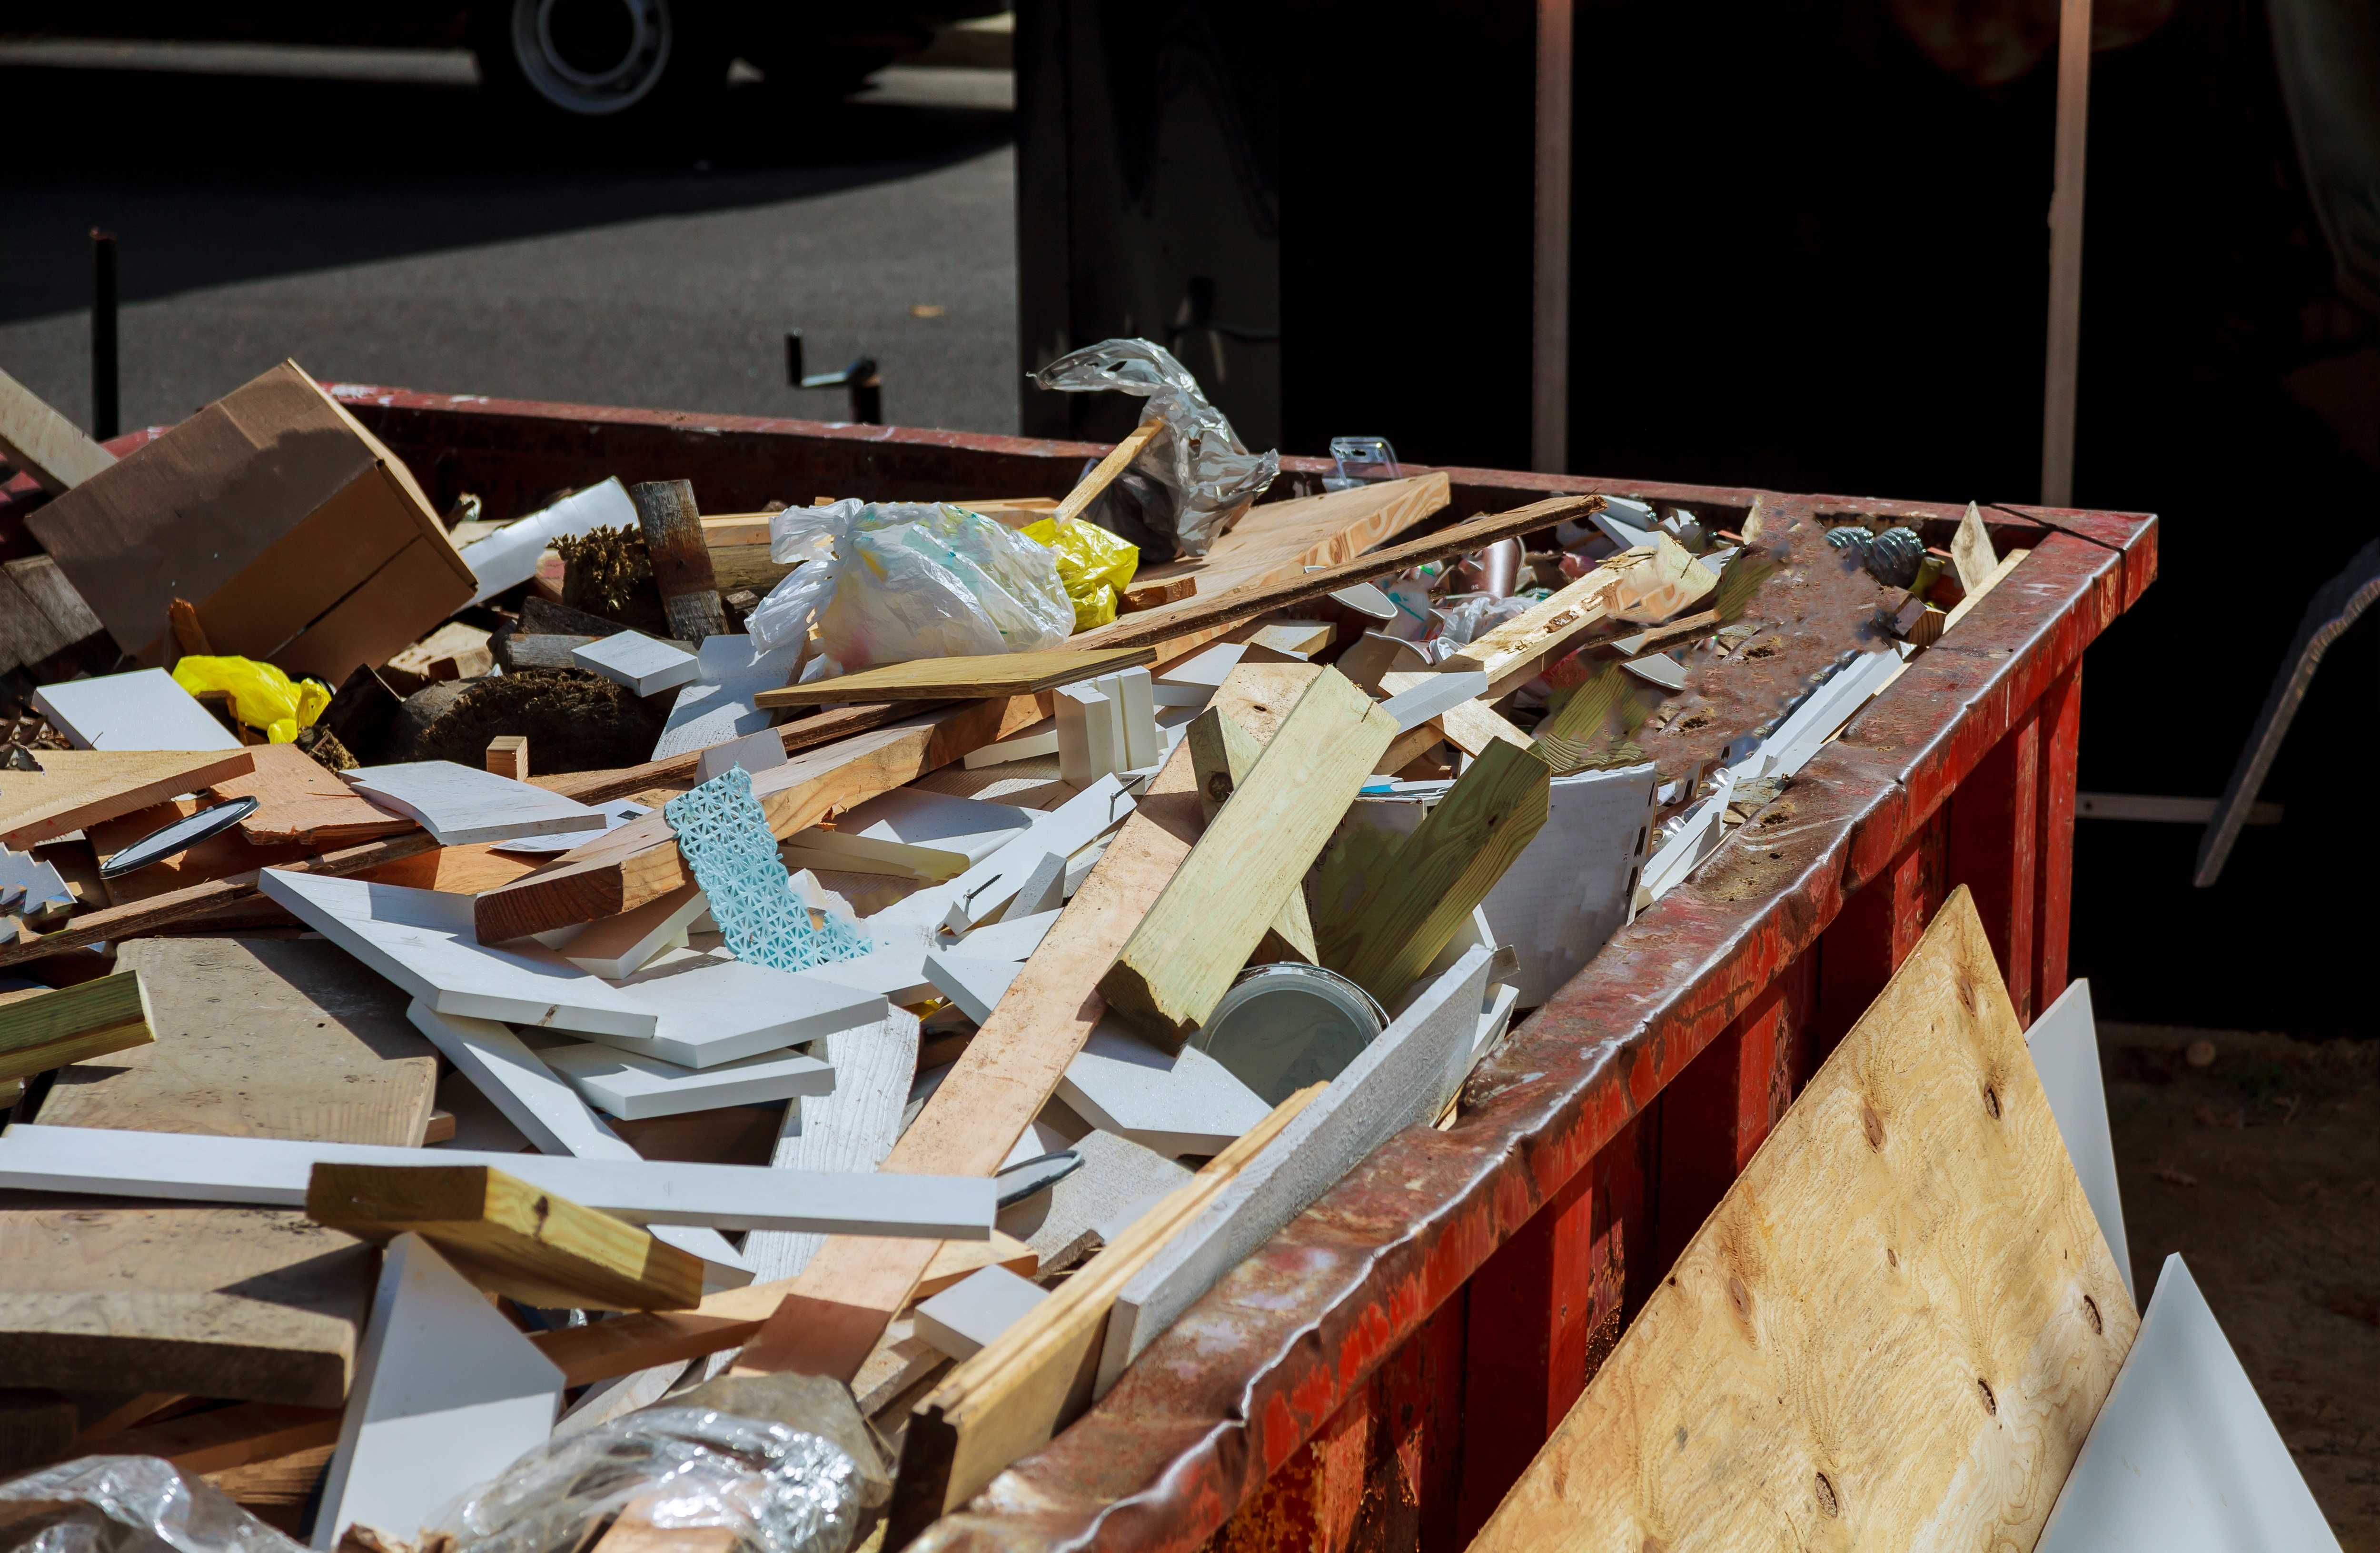 Local Skip Hire Services in Belsize